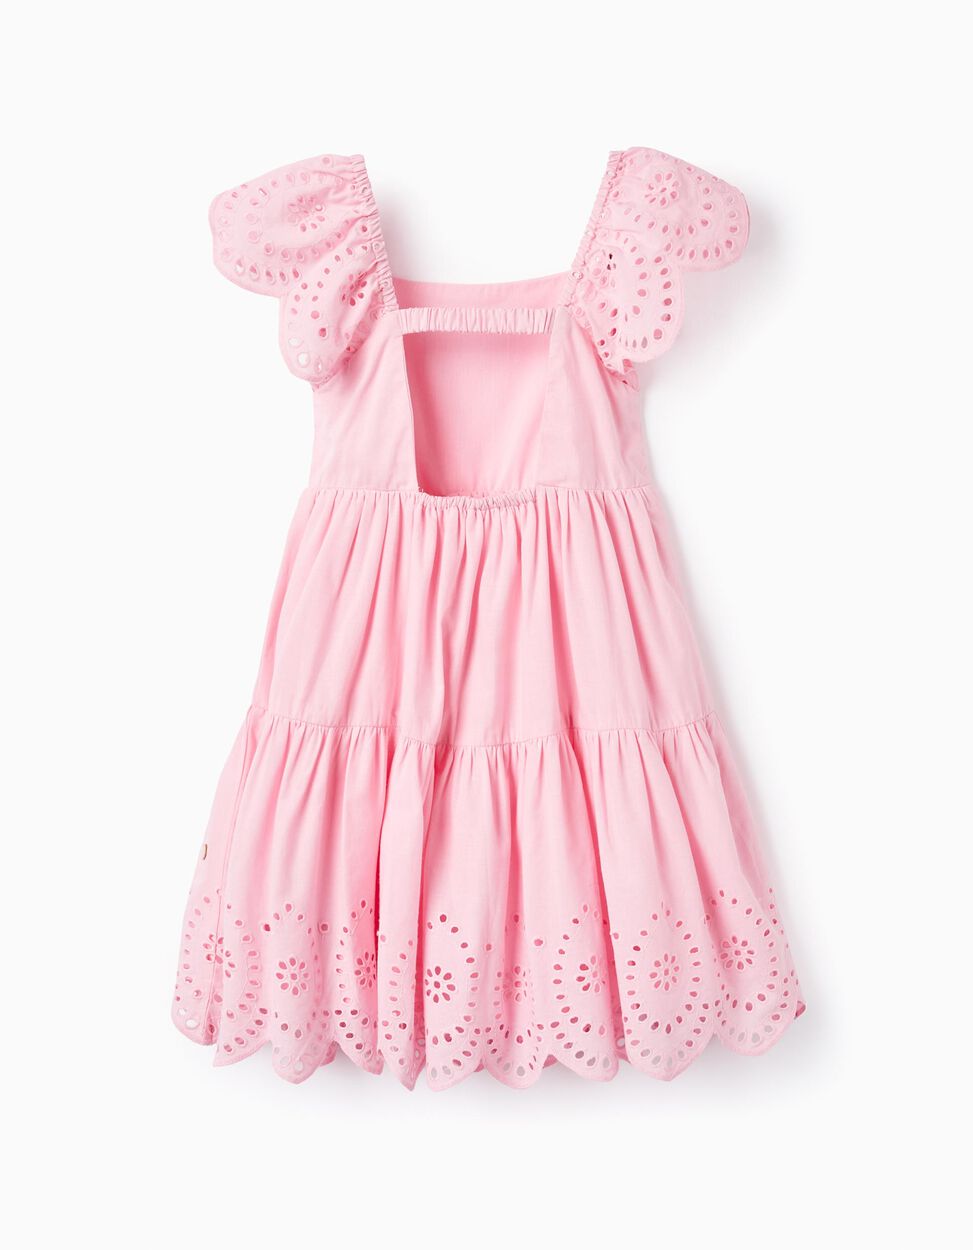 Buy Online Cotton Dress with English Embroidery for Girls, Pink